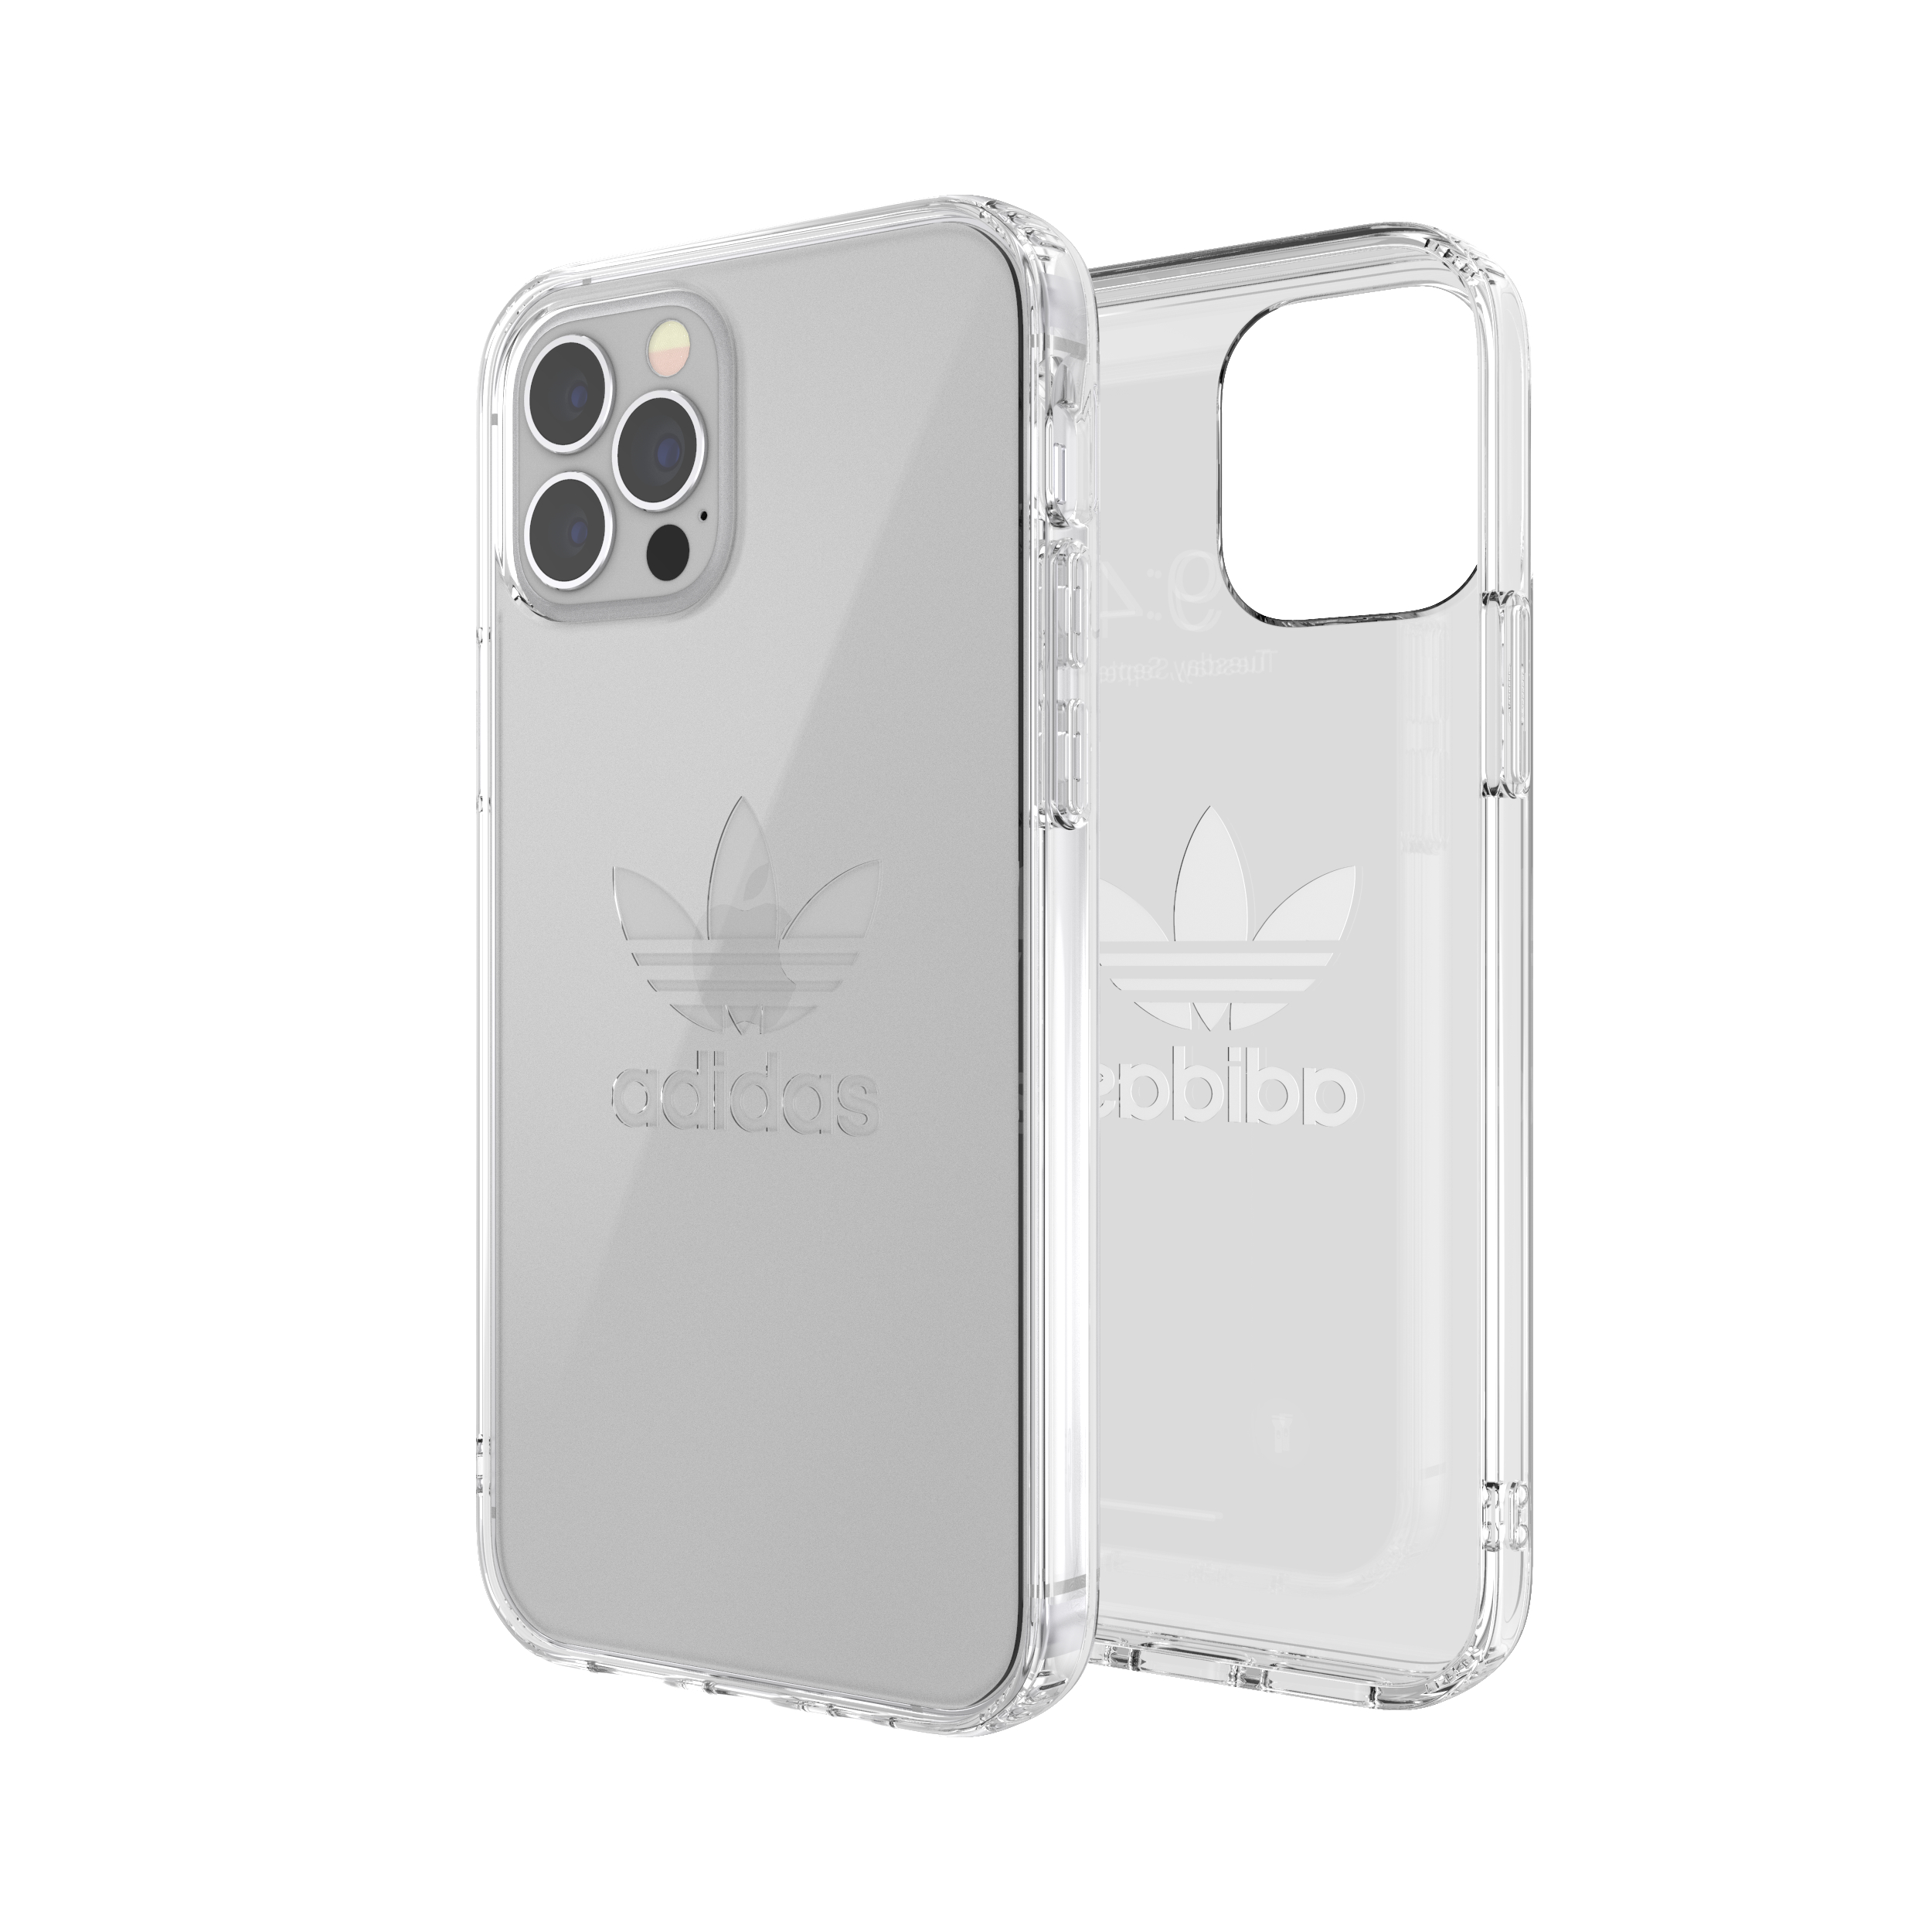 ADIDAS ORIGINALS Backcover, Pro, Apple, 12, iPhone 12 Protective Clear iPhone Case, Transparent